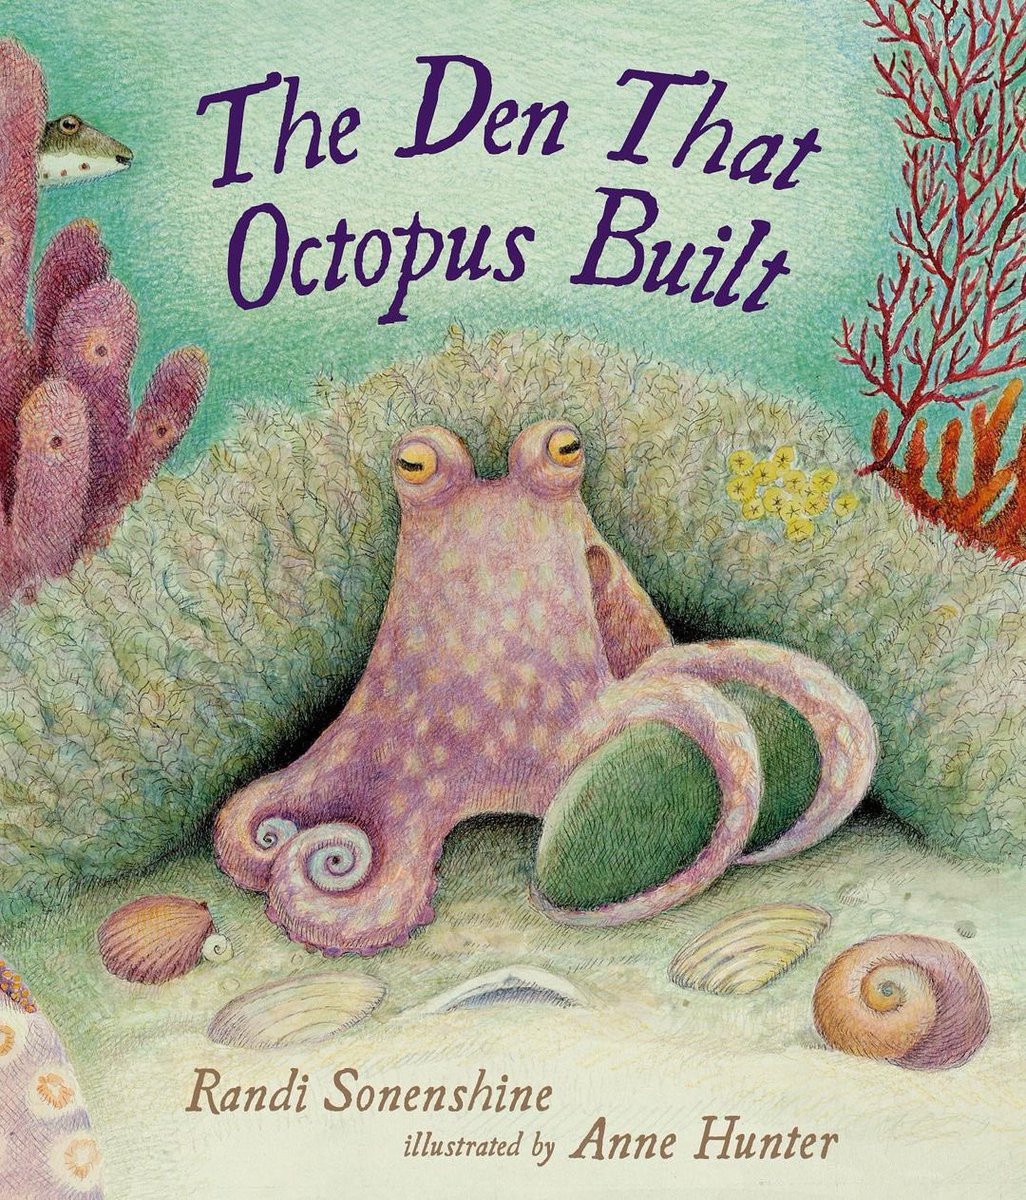 Meet OCTOPUS! I’m so excited to share this dreamy cover by Anne Hunter for our next book from @Candlewick coming May 2024. #octopus #STEAM #librarians #teachersoftwitter #kidslovenonfiction @SteamTeamBooks @KidLitCollectiv @CandlewickClass #kidlit #kidlitart #literacy #poetry